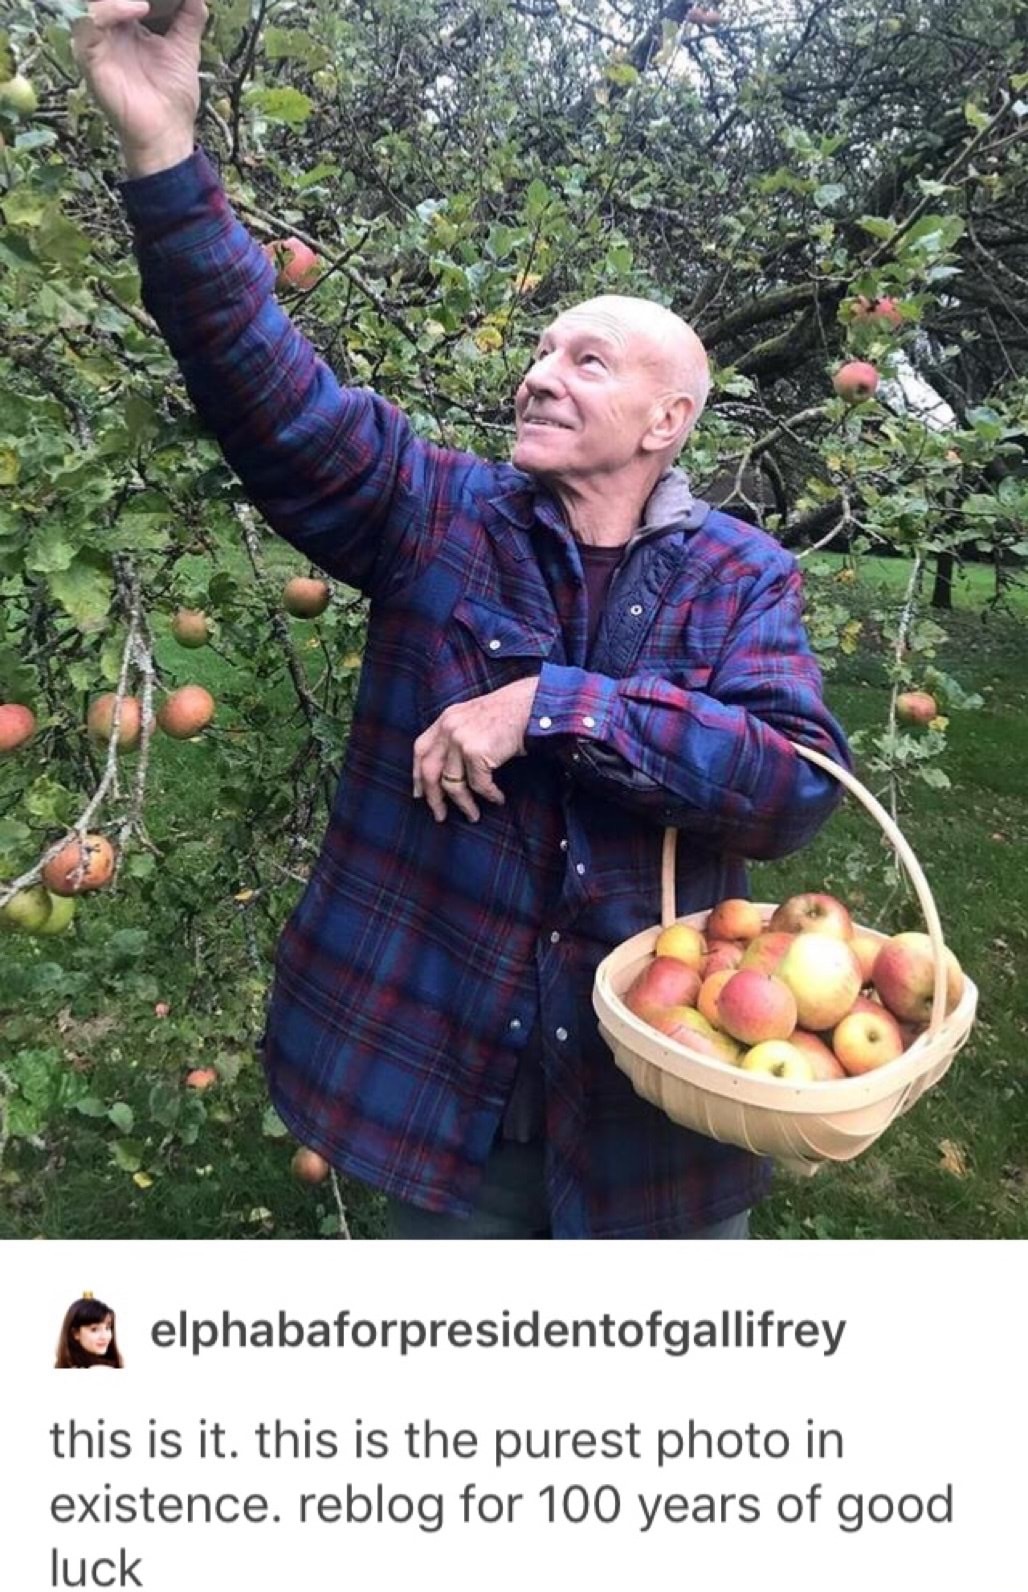 patrick stewart apple - elphabaforpresidentofgallifrey this is it. this is the purest photo in existence. reblog for 100 years of good luck